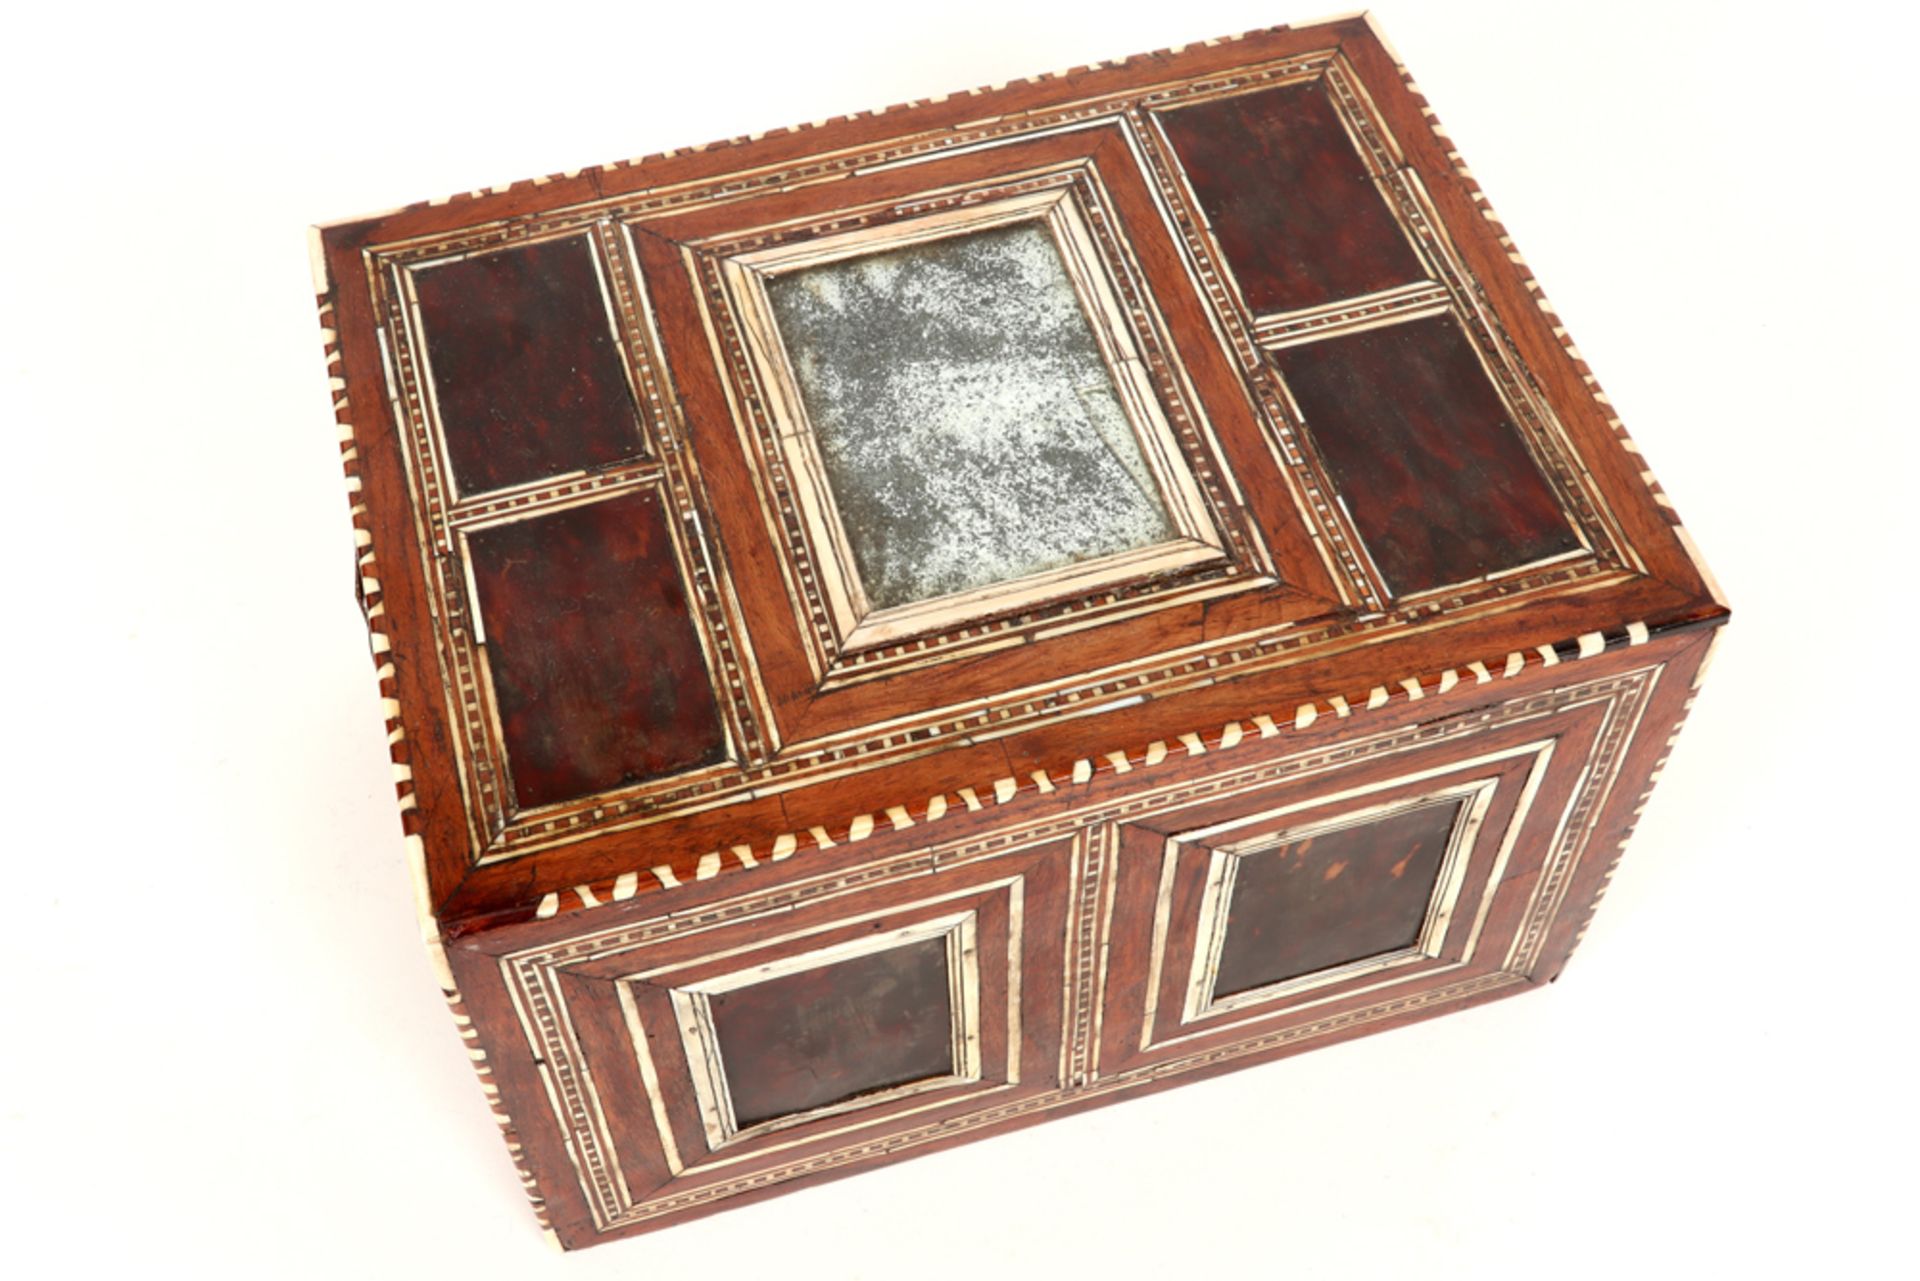 17th Cent. Indo-Portuguese table cabinet in rose-wood, ivory and tortoiseshell with an original - Image 6 of 7